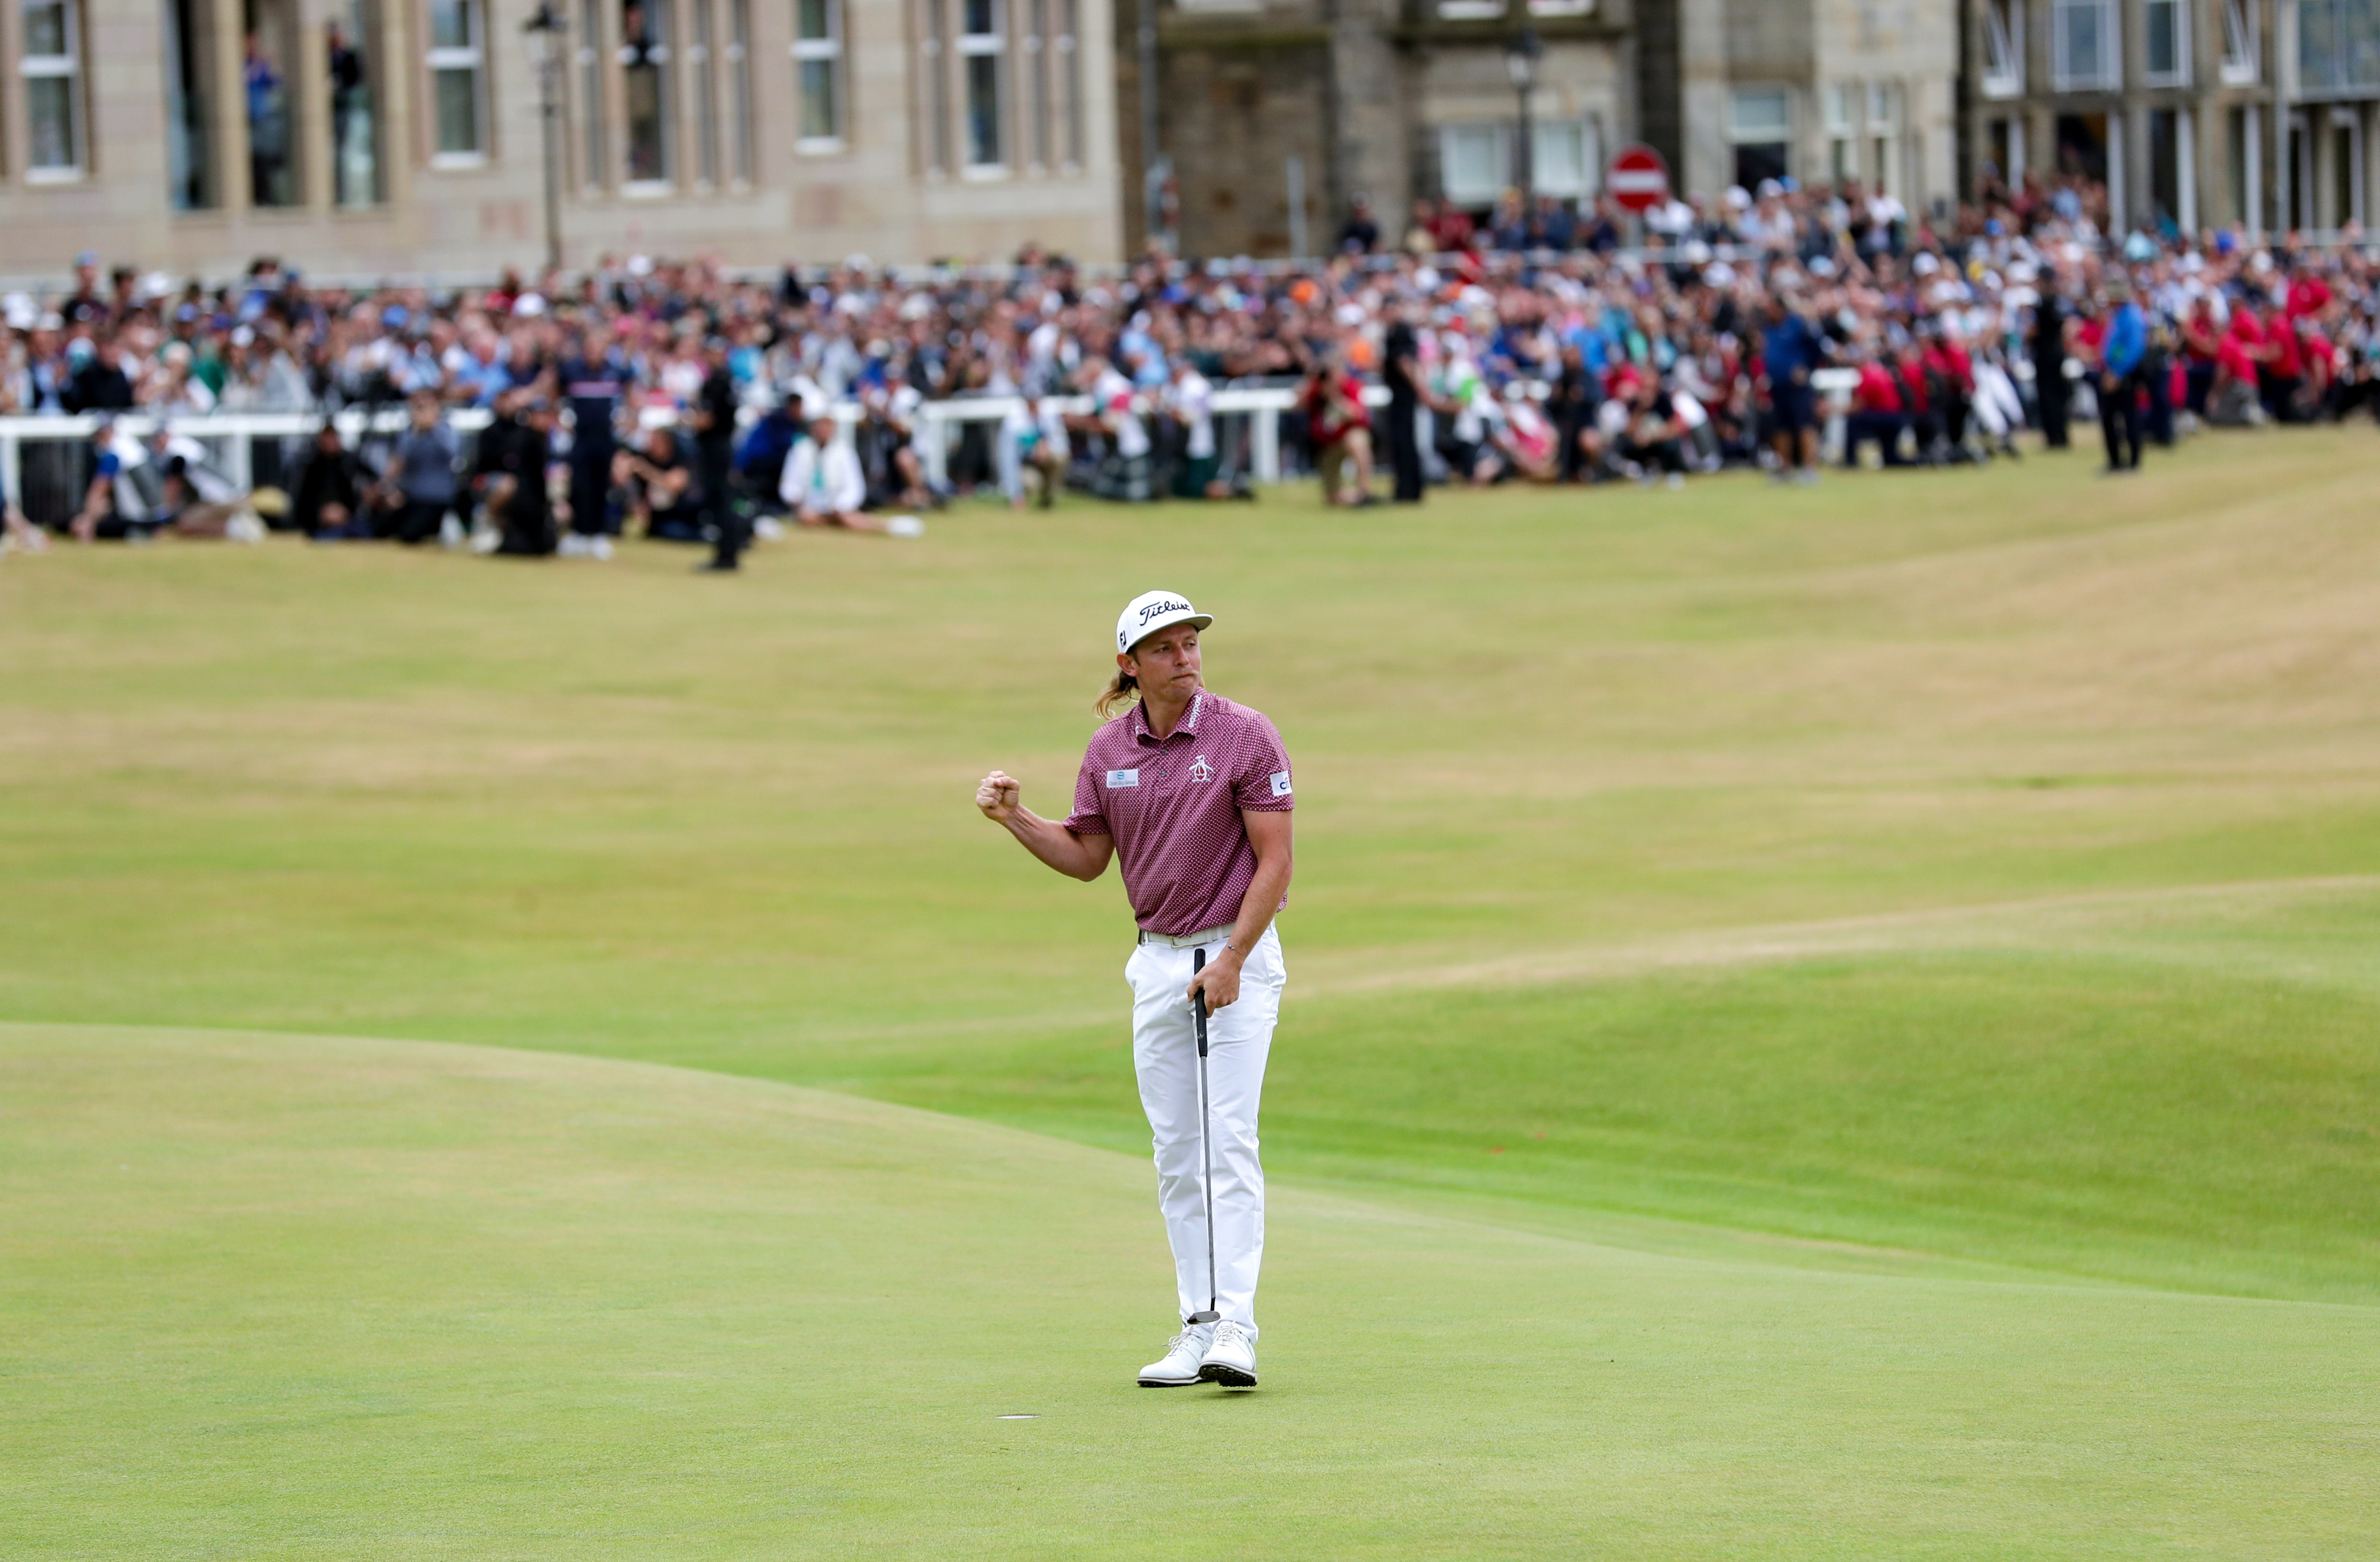 Smith celebrates his birdie on the 18th after a brilliant final round of 64 clinched him a one-shot victory in the 150th Open Championship (Richard Sellers/PA)